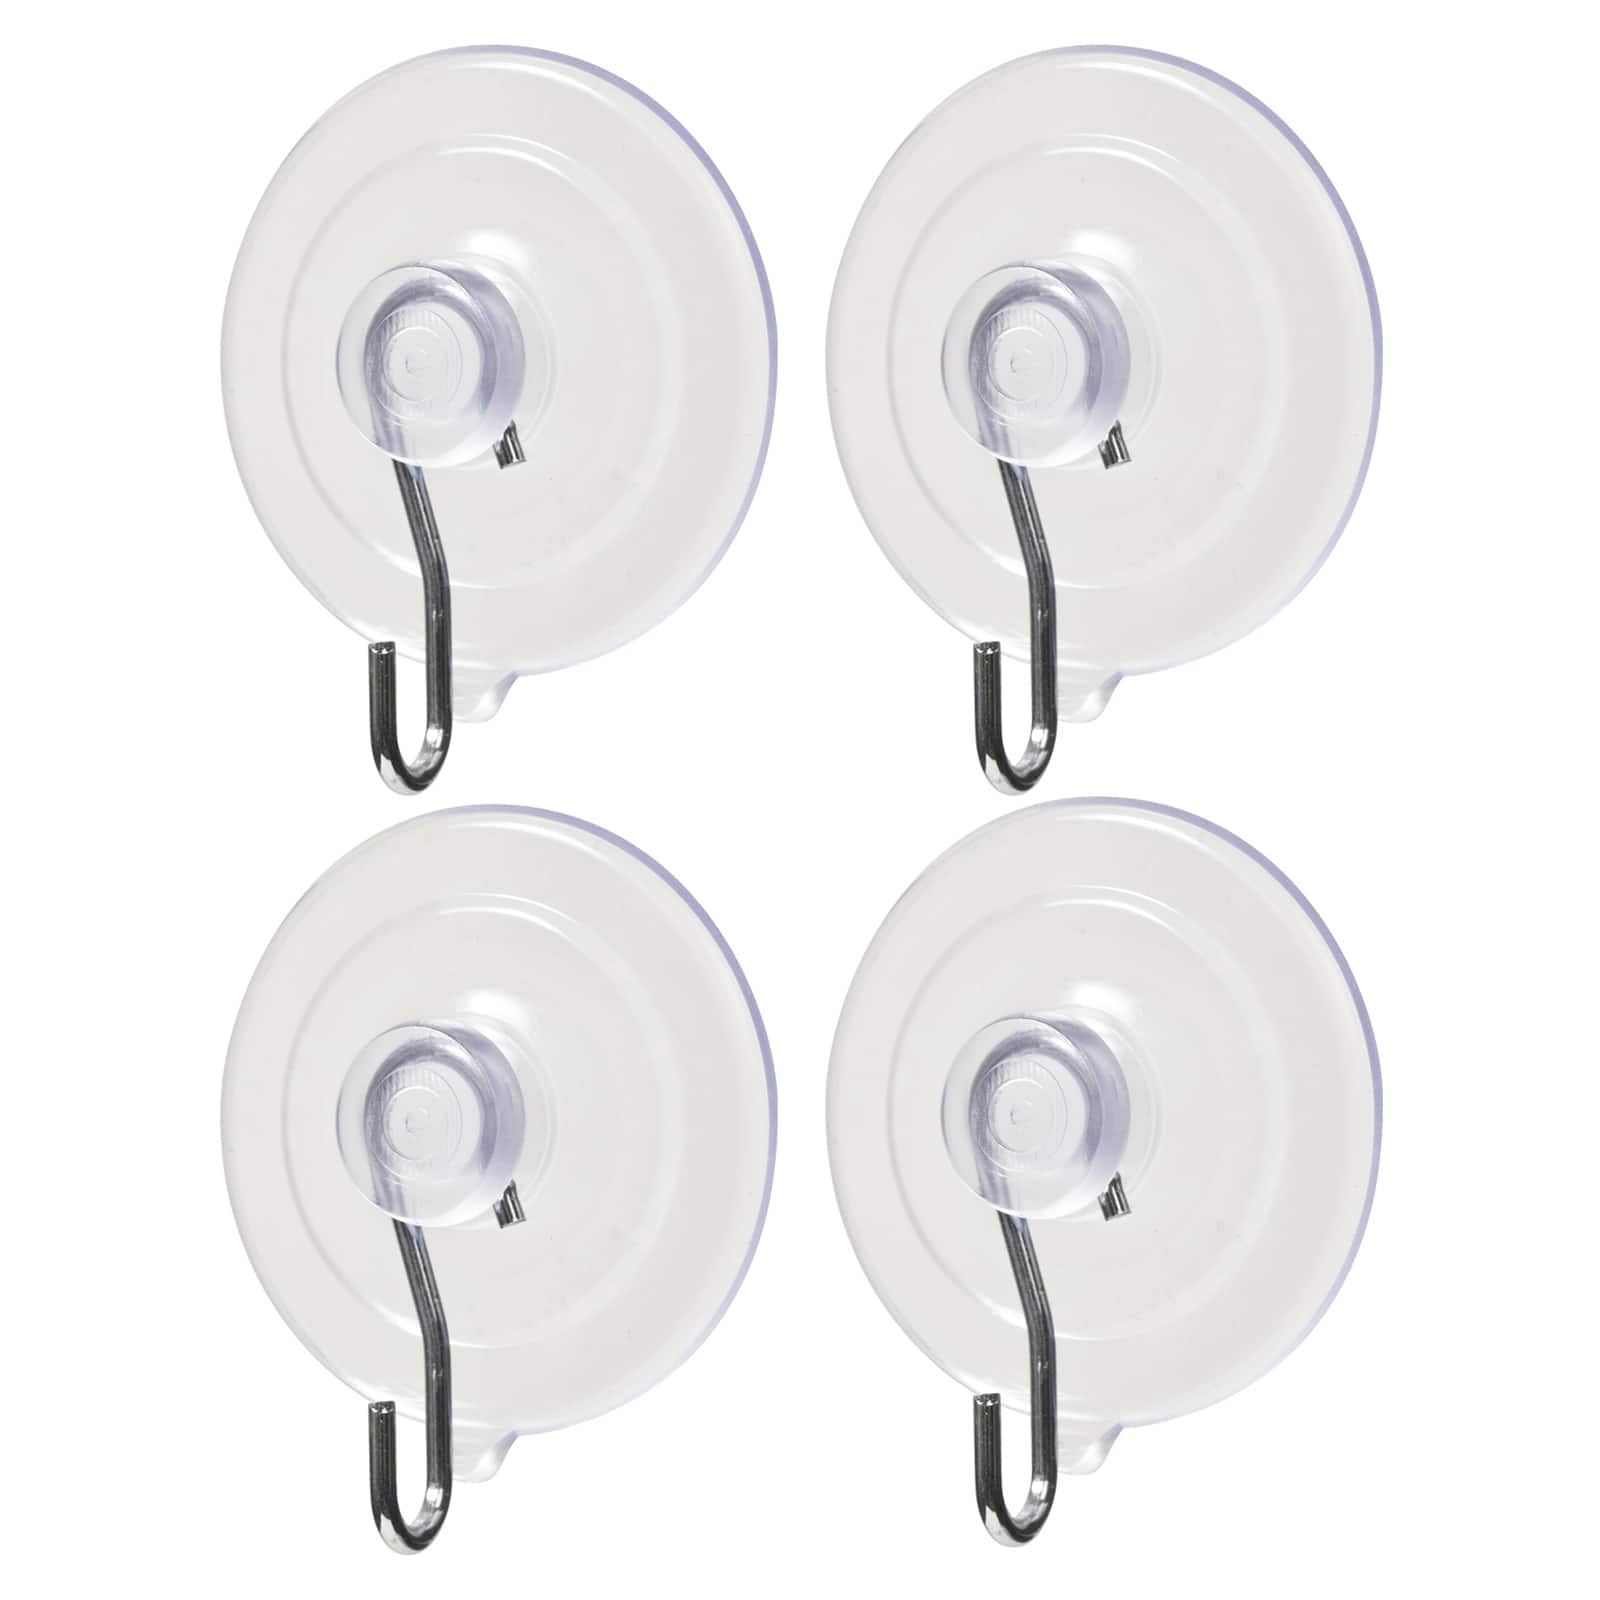 Suction Cup Hooks